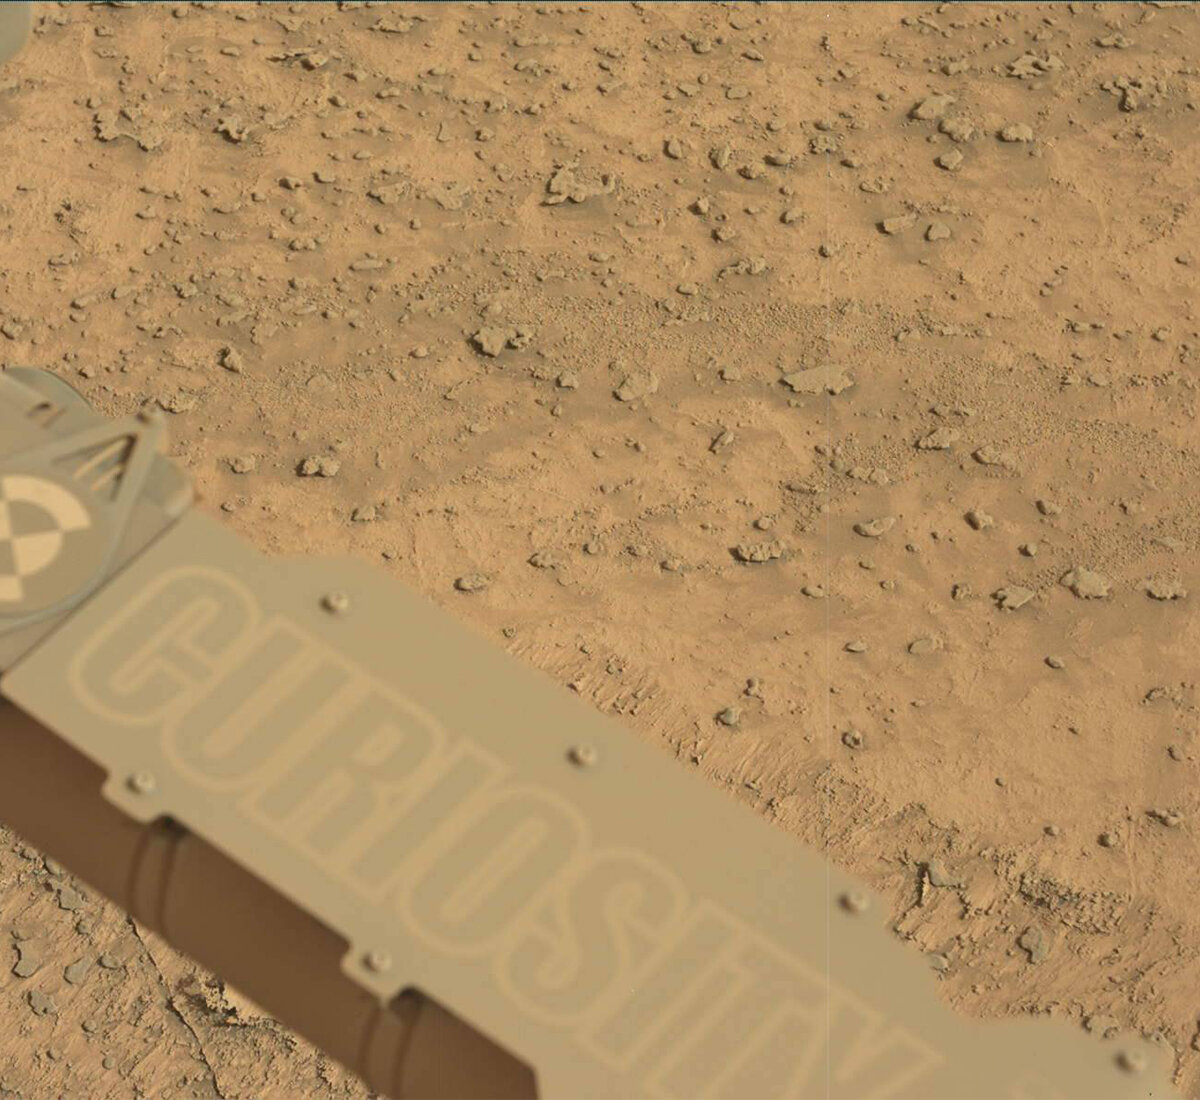 This image showing the Curiosity rover's nameplate was taken by Mast Camera (Mastcam) onboard NASA's Mars rover Curiosity on Sol 3708.